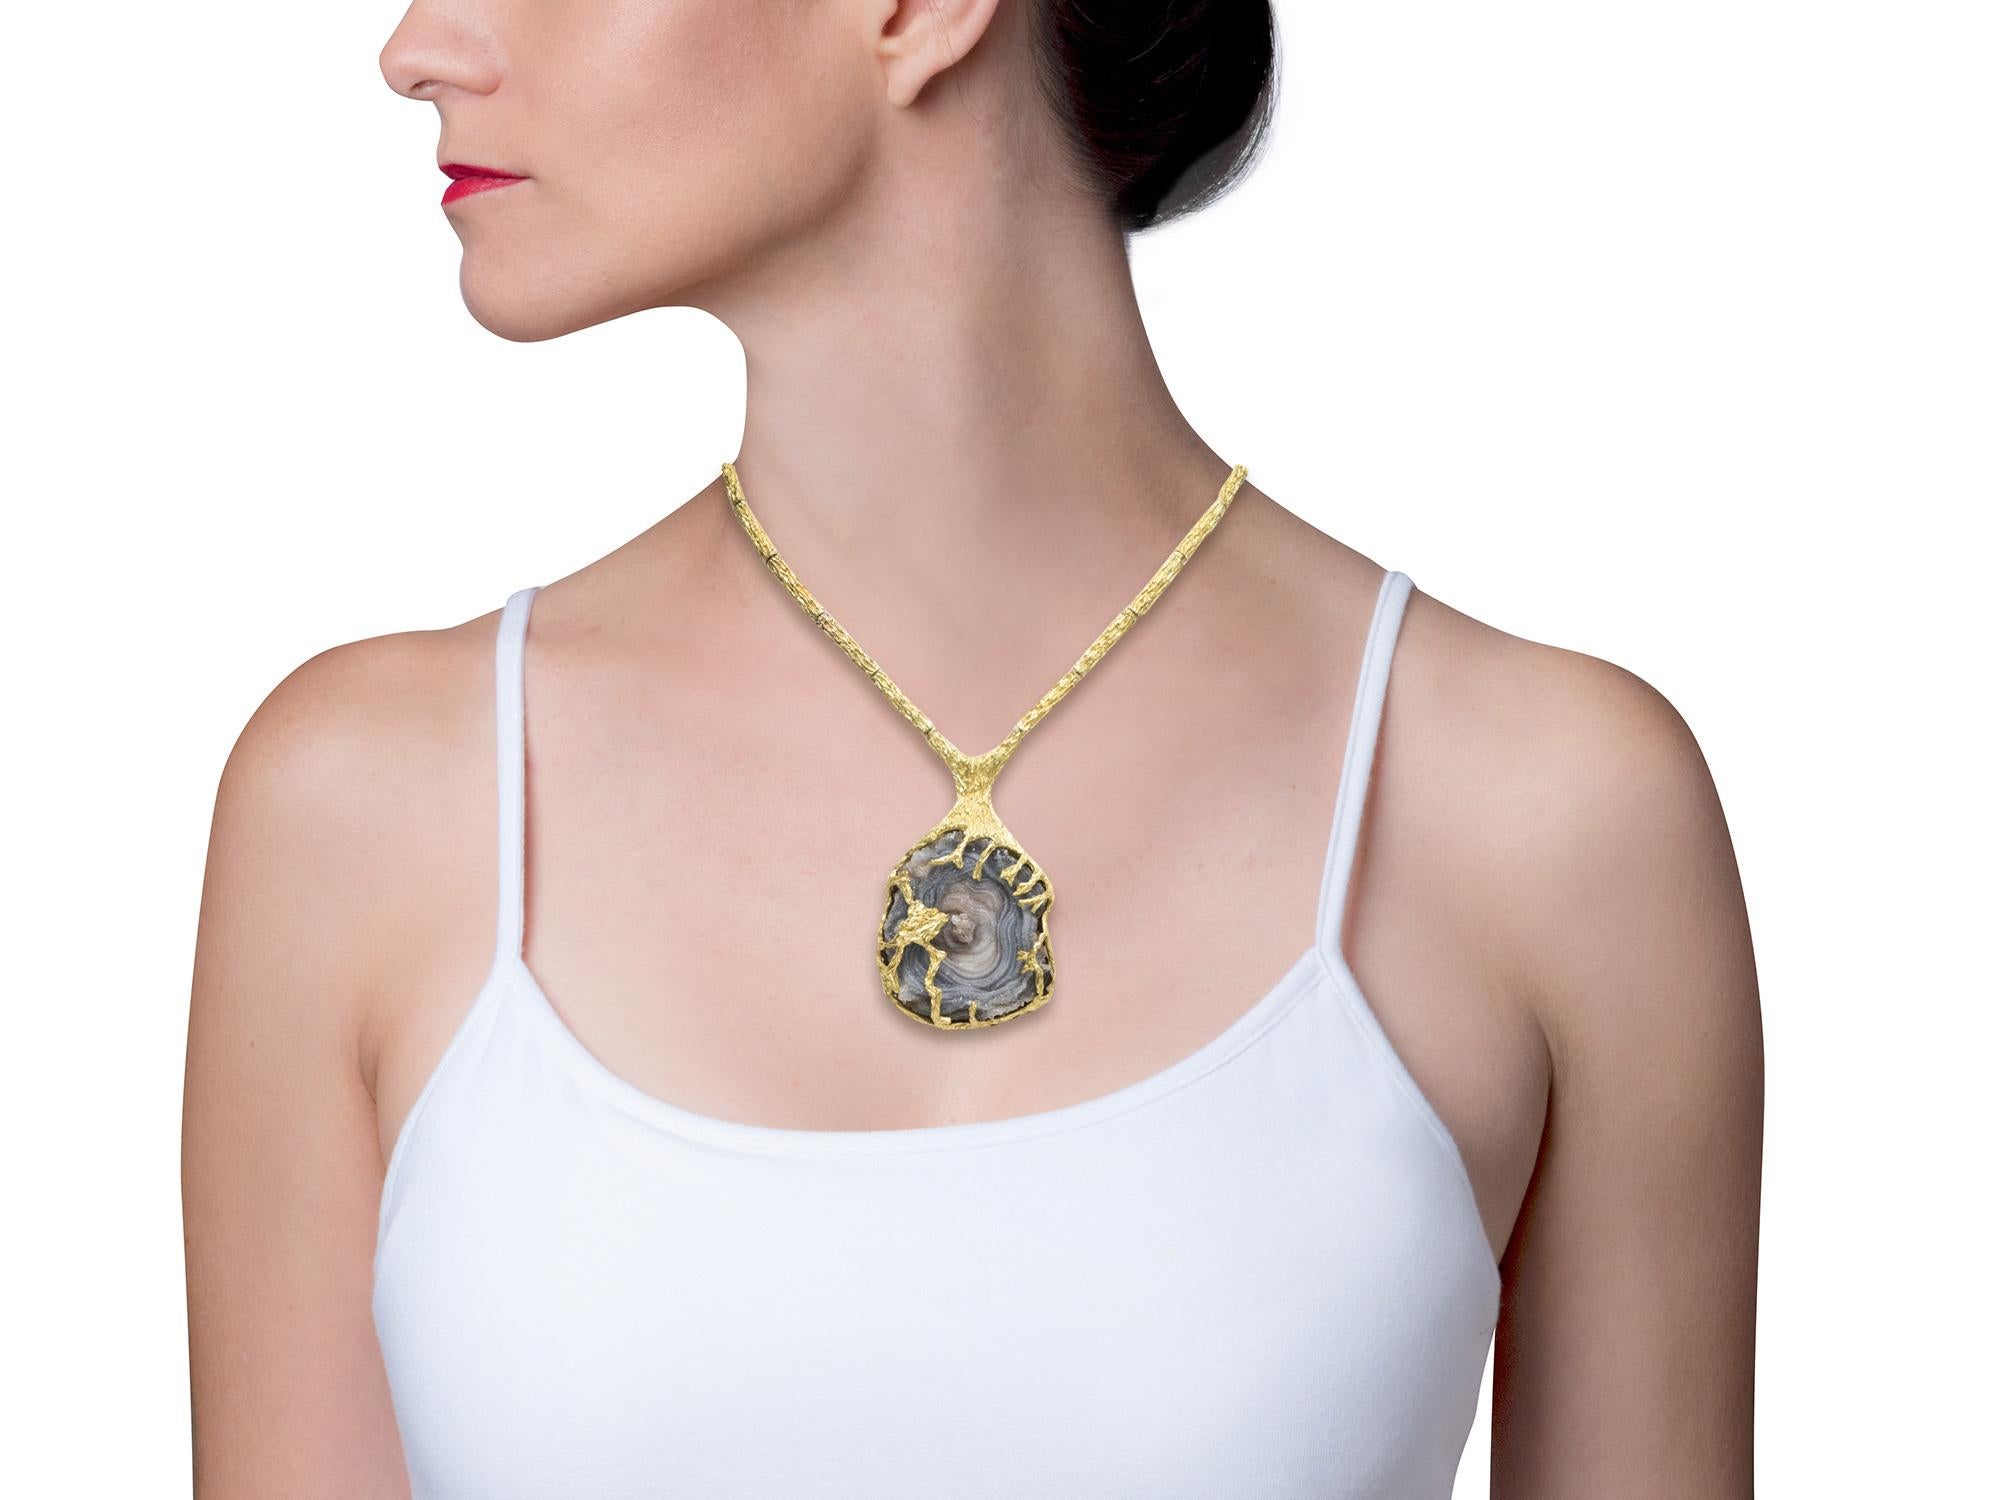 Beautiful Druzy Quartz Pendant Necklace set in 18k gold signed by H. Stern.  Circa 1970.